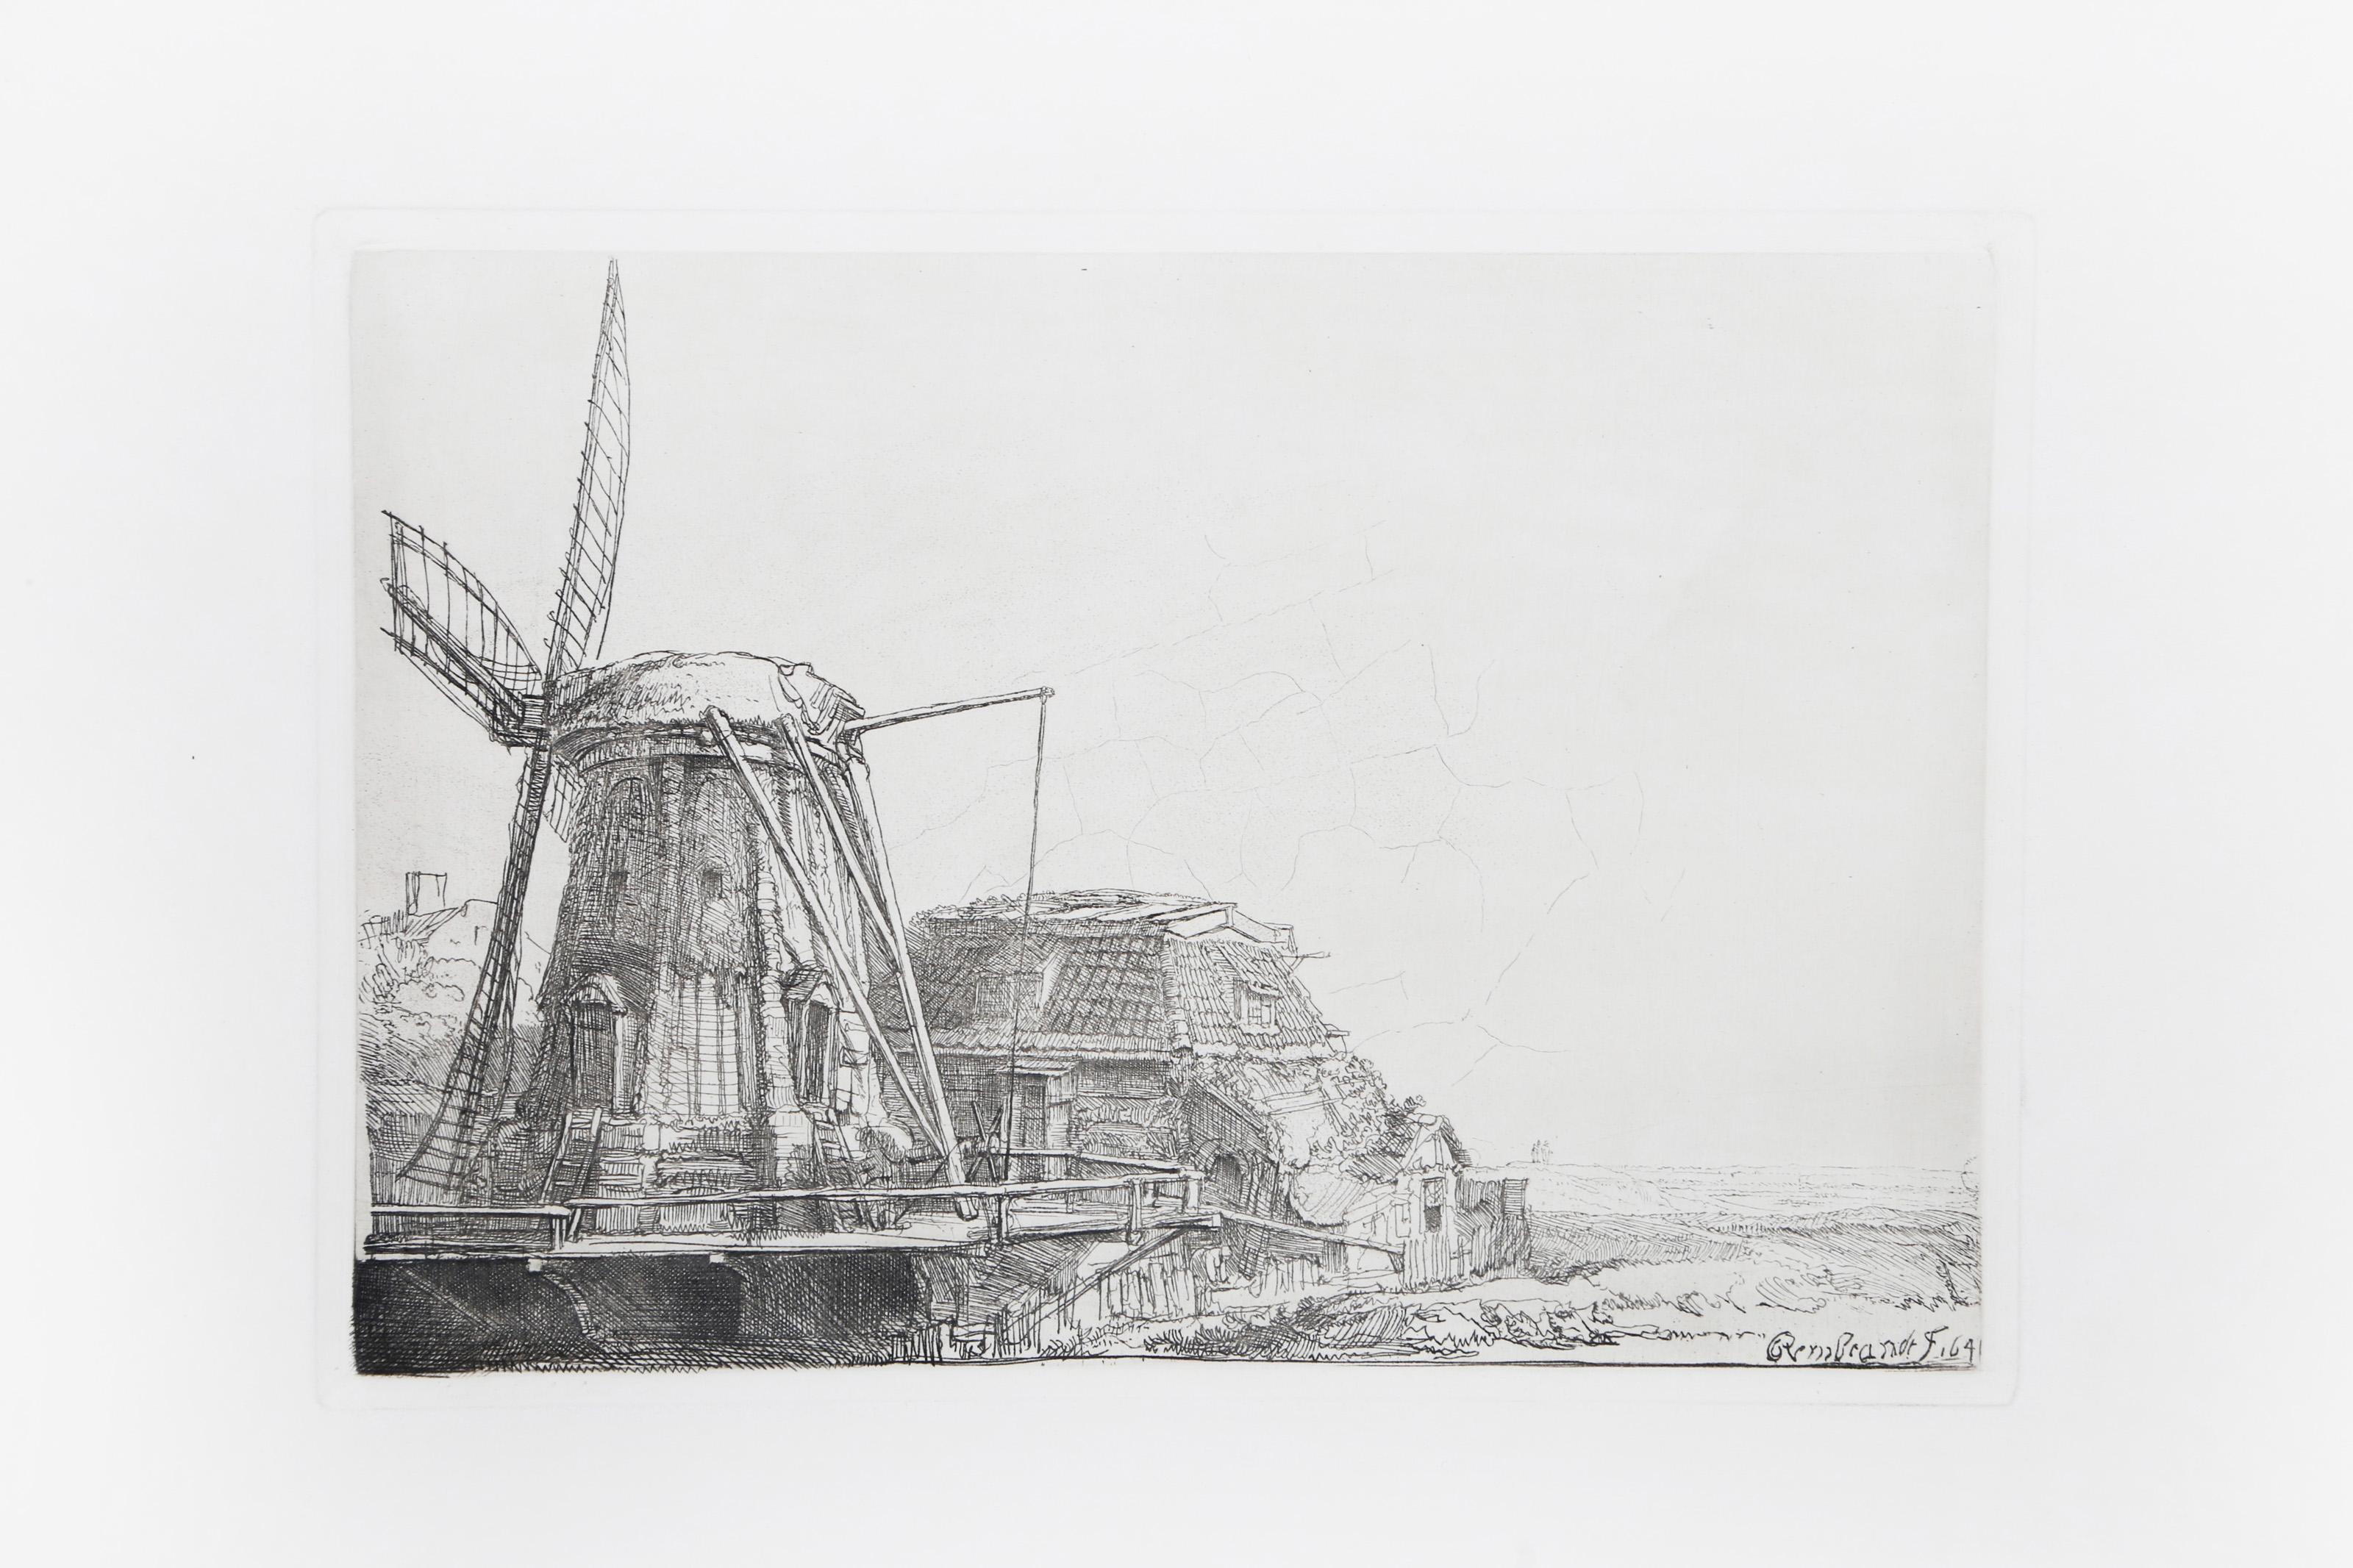  Rembrandt van Rijn, After by Amand Durand, Dutch (1606 - 1669) - The Windmill, Year: Of Original 1641, Medium: Etching, Image Size: 6 x 8 inches, Size: 13  x 14 in. (33.02  x 35.56 cm), Printer: Amand Durand, Description: French Engraver and